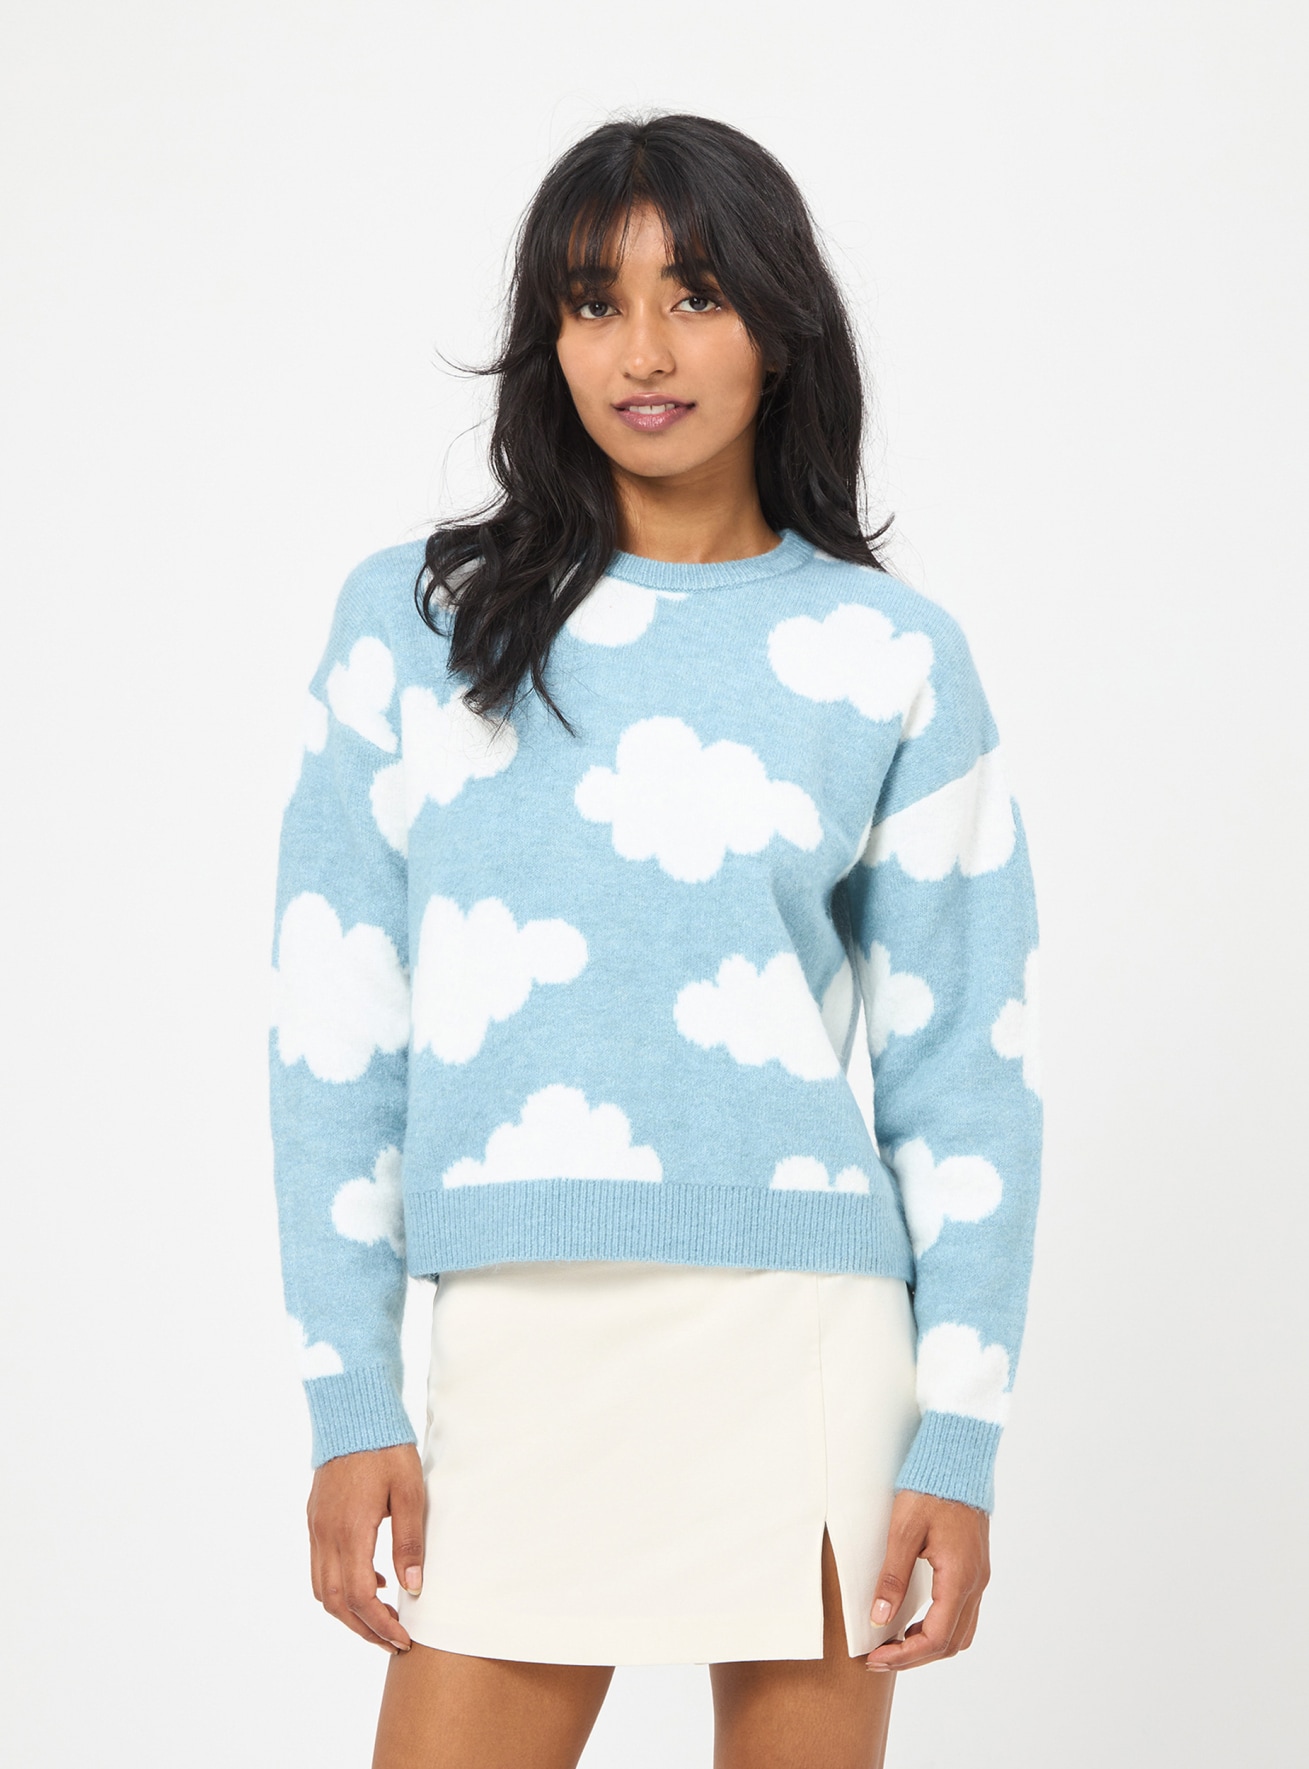 Sky-blue Crew neck sweater with cloud pattern - Buy Online